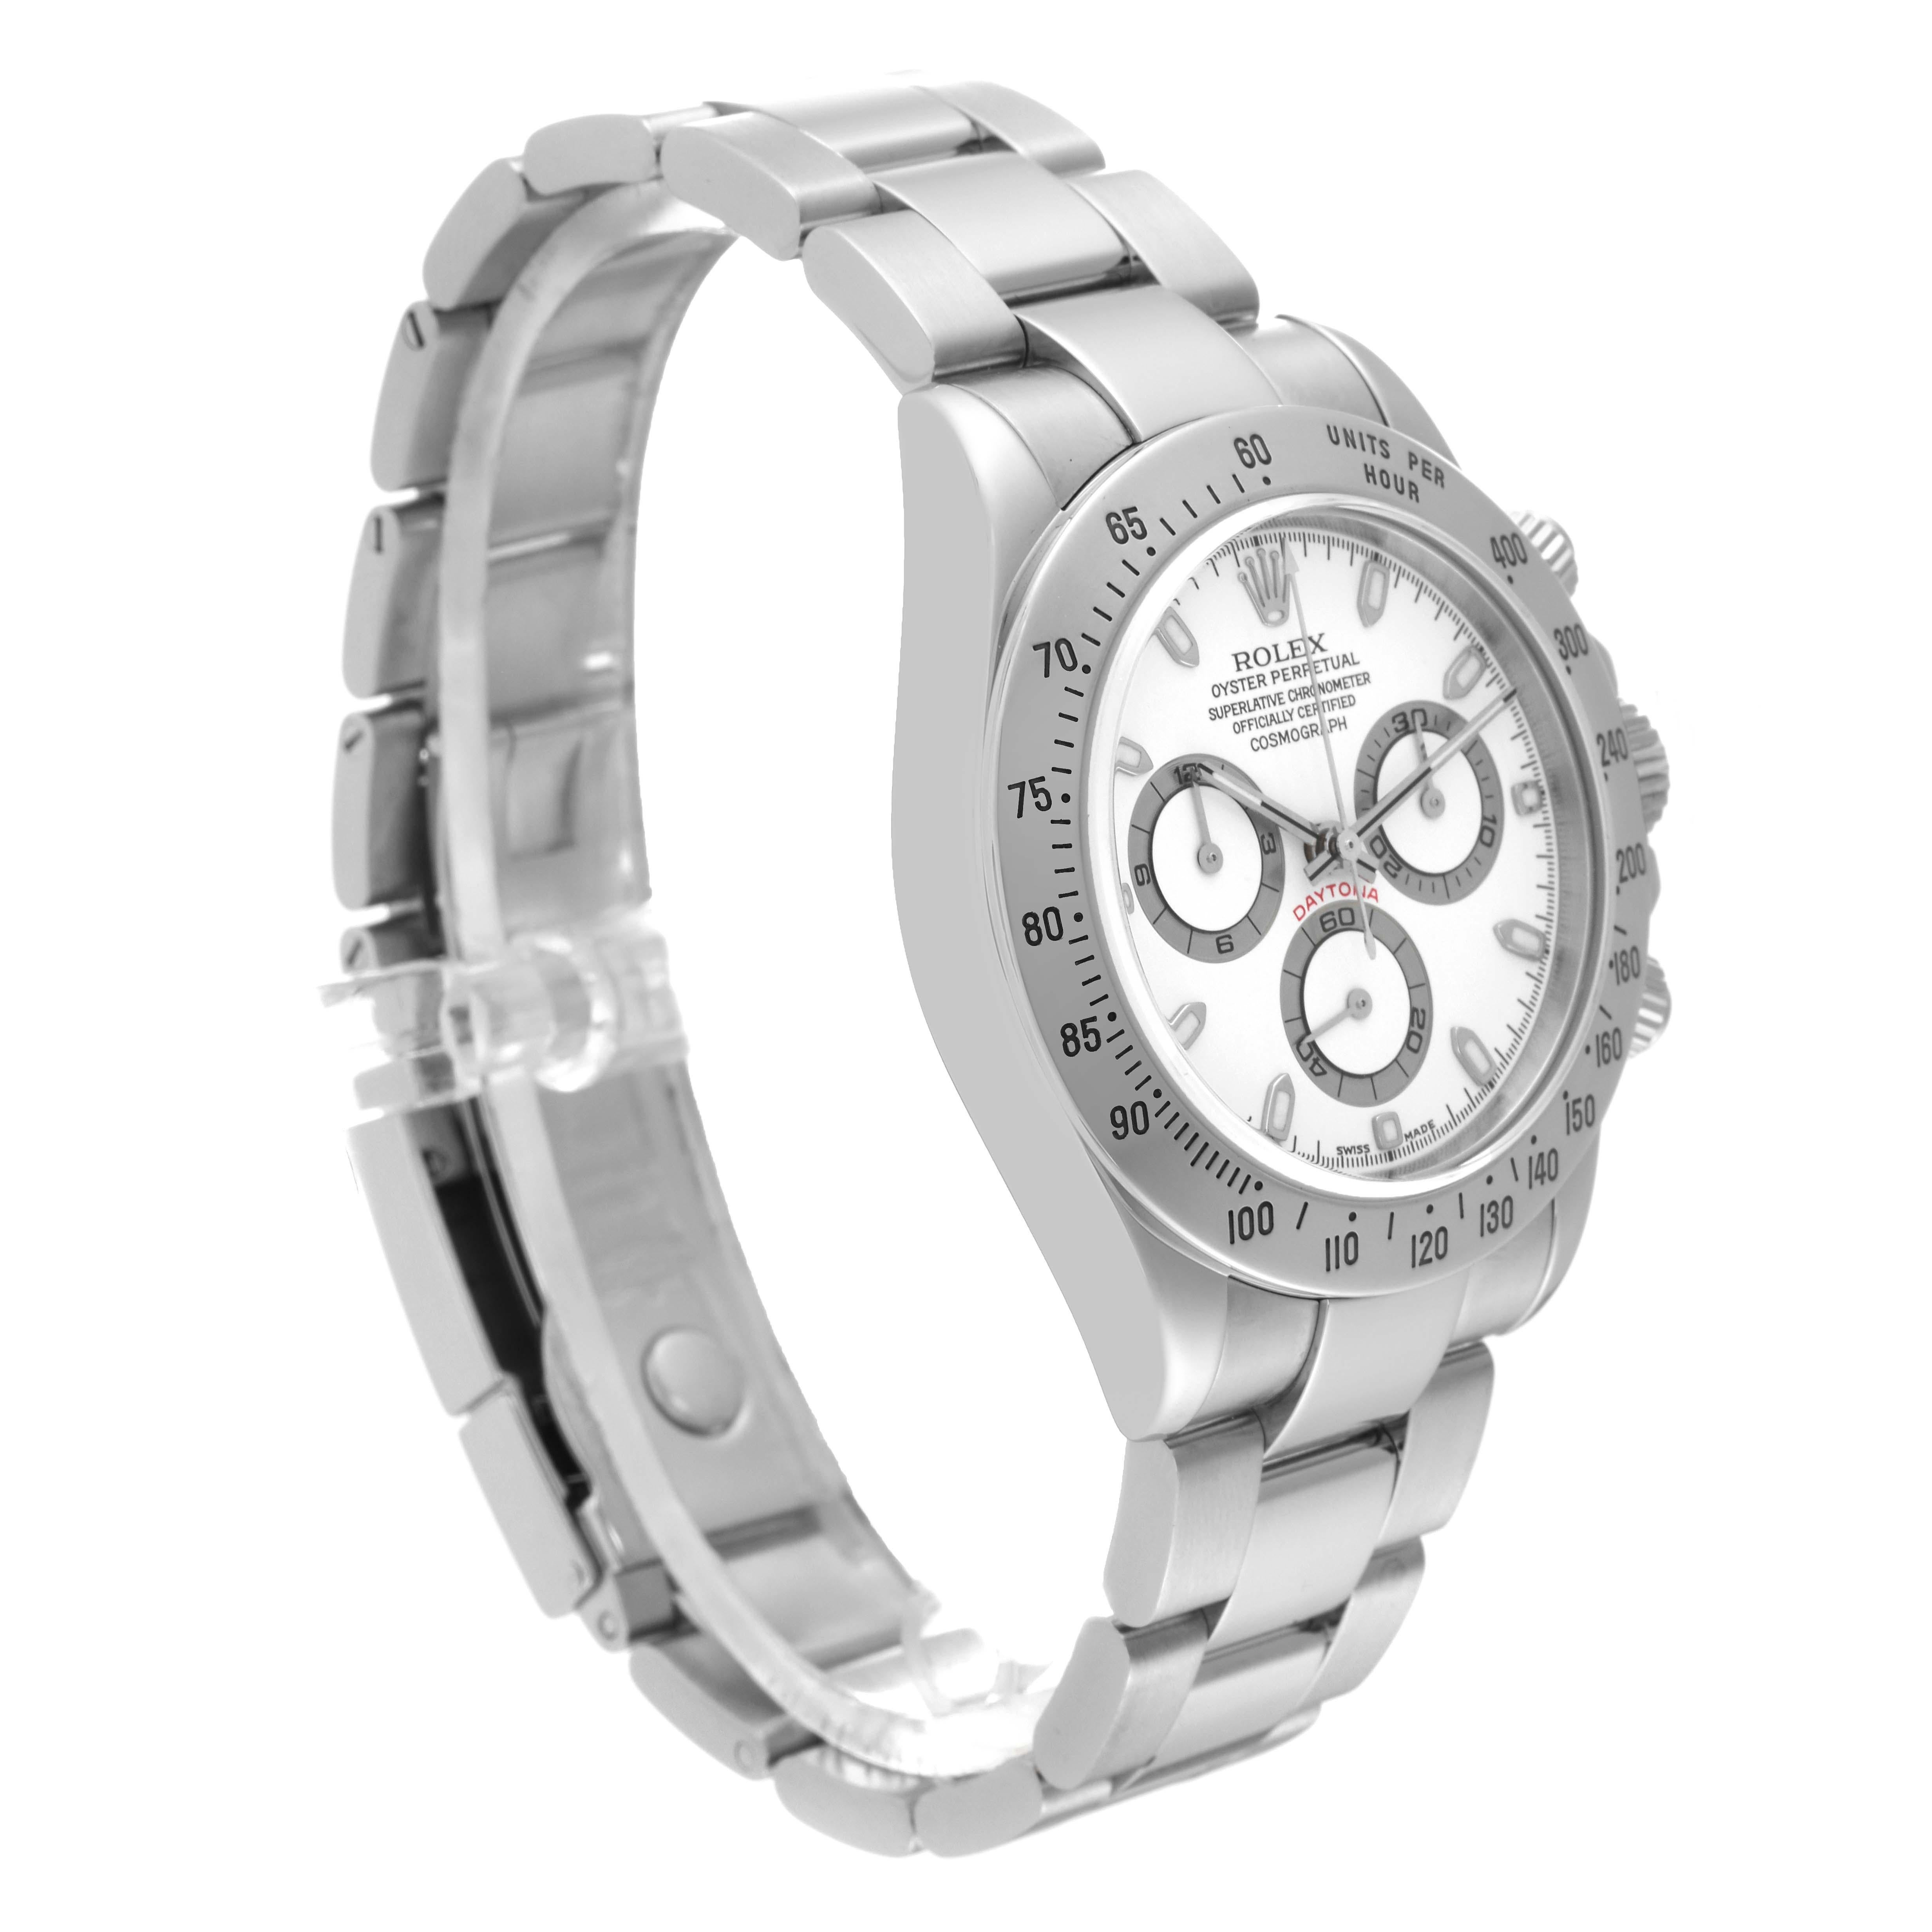 Rolex Daytona White Dial Chronograph Steel Mens Watch 116520 Box Papers For Sale 6